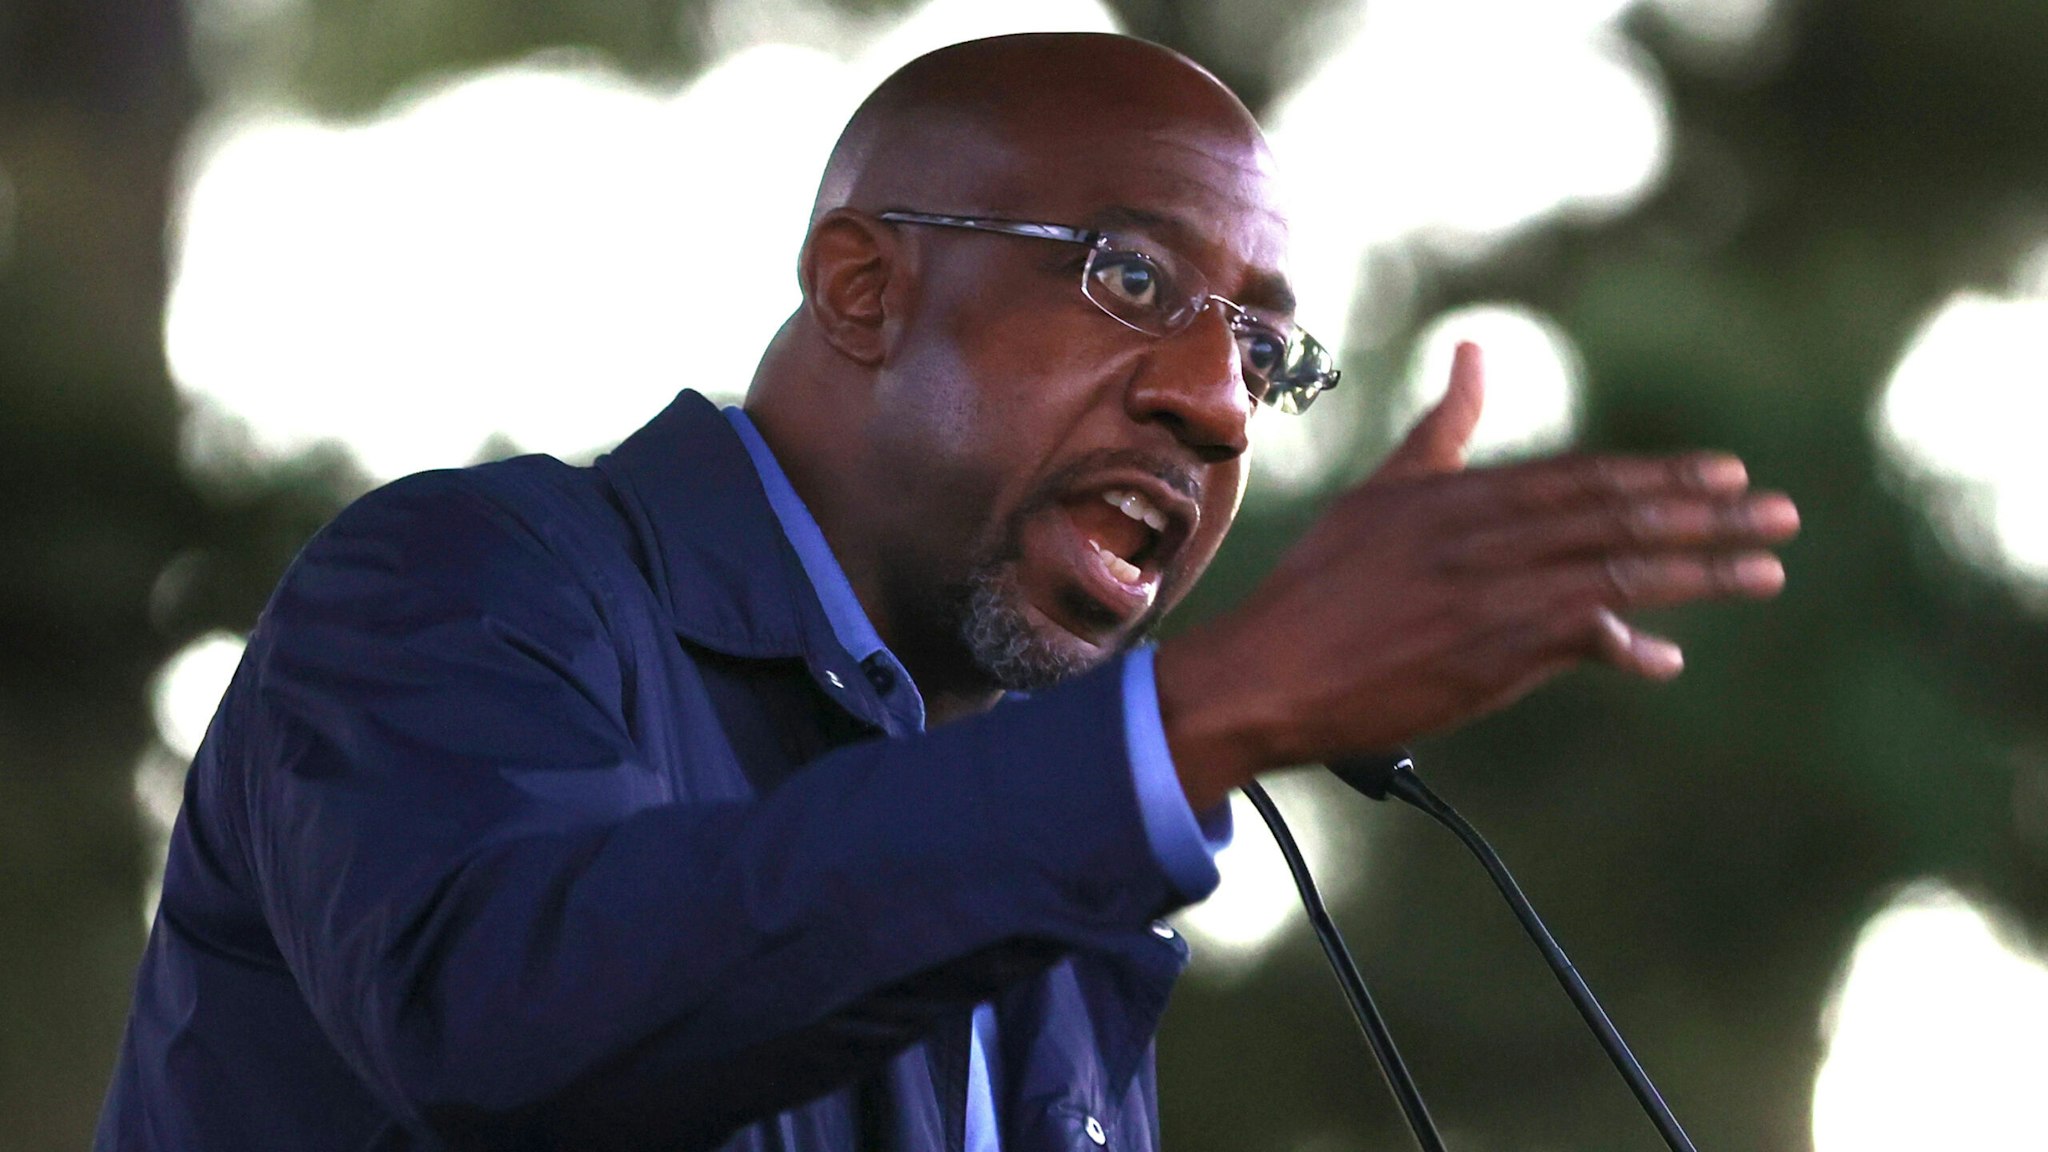 COLUMBUS, GEORGIA - OCTOBER 29: Democratic U.S. Senate candidate Rev. Raphael Warnock speaks during a "Get Out the Early Vote" drive-in campaign event on October 29, 2020 in Columbus, Georgia. With less than a week to go until Election Day, Democratic candidates for the U.S. Senate in Georgia are continuing to campaign throughout the state.